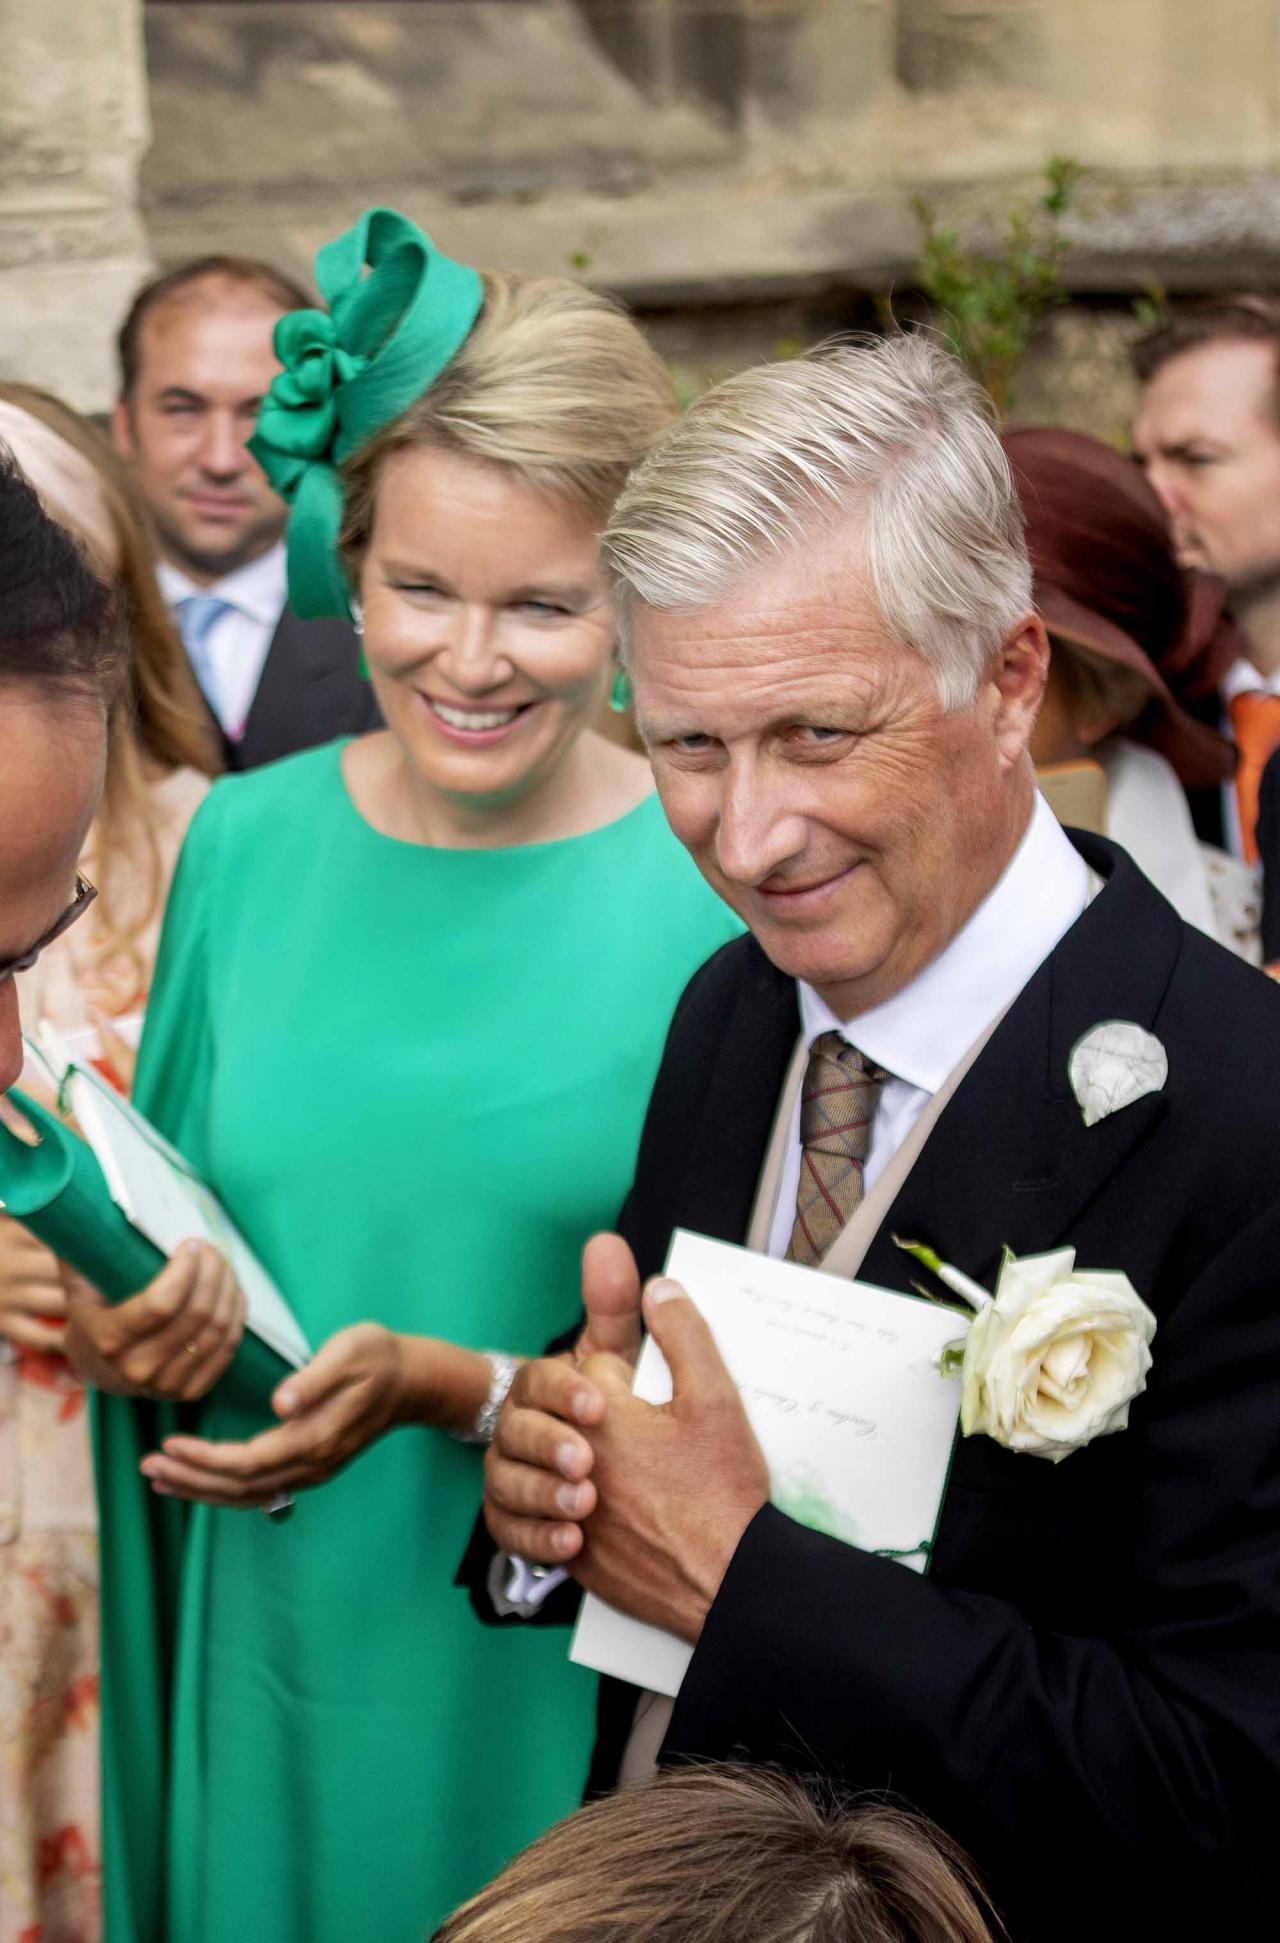 03-08-2022 Marriage Wedding of Count Charles-Henri d Udekem d Acoz, the younger brother of the Belgium Queen, and Caroline Philippe at Pont-L Eveque in France.Queen Mathilde and King Filip, PhilippePrincess Elisabeth © ddp images/PPE/Nieboer Point de Vue out